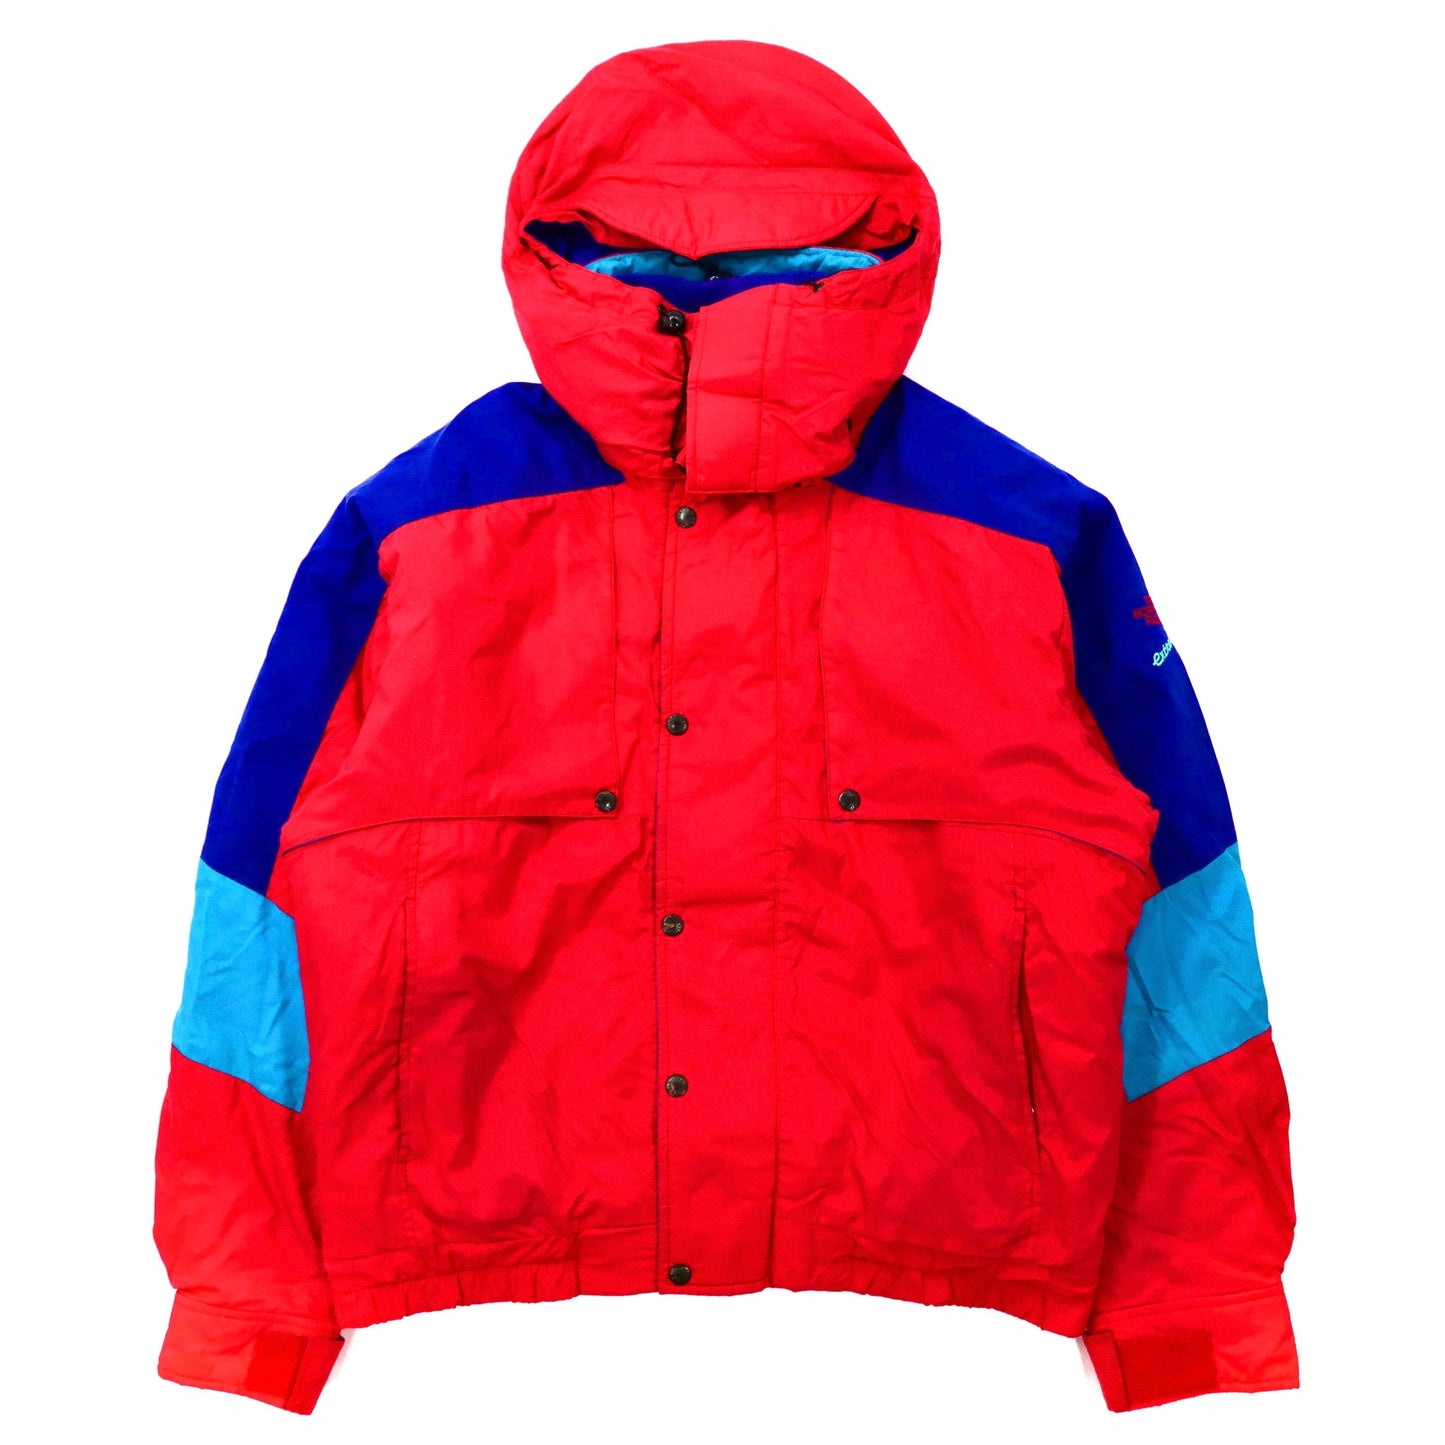 THE NORTH FACE EXTREME PUFFER Hoodie M Red Multicolor Extreme 90s 